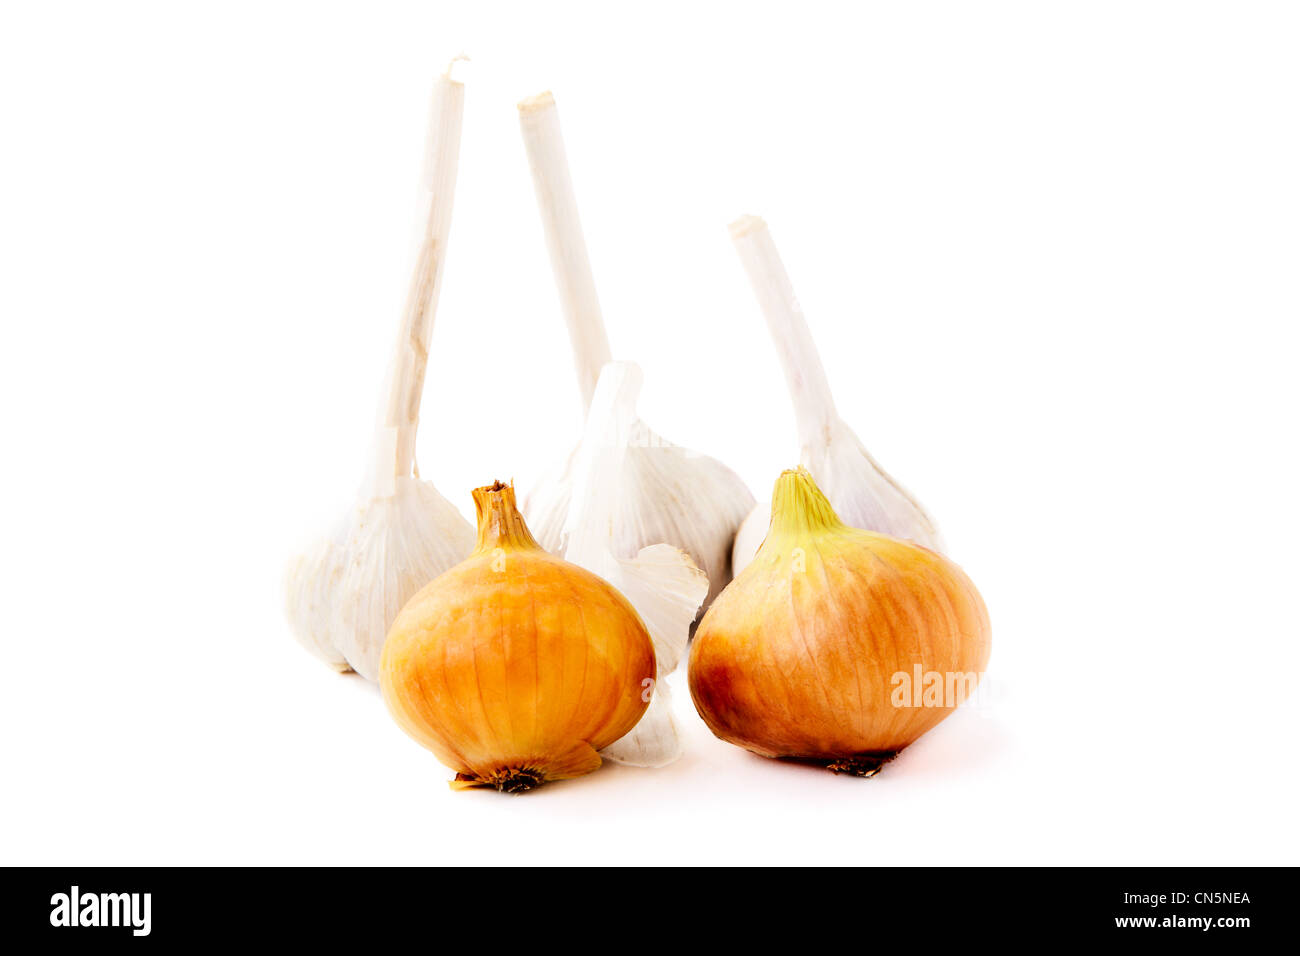 Garlic onions isolated on a white background Stock Photo